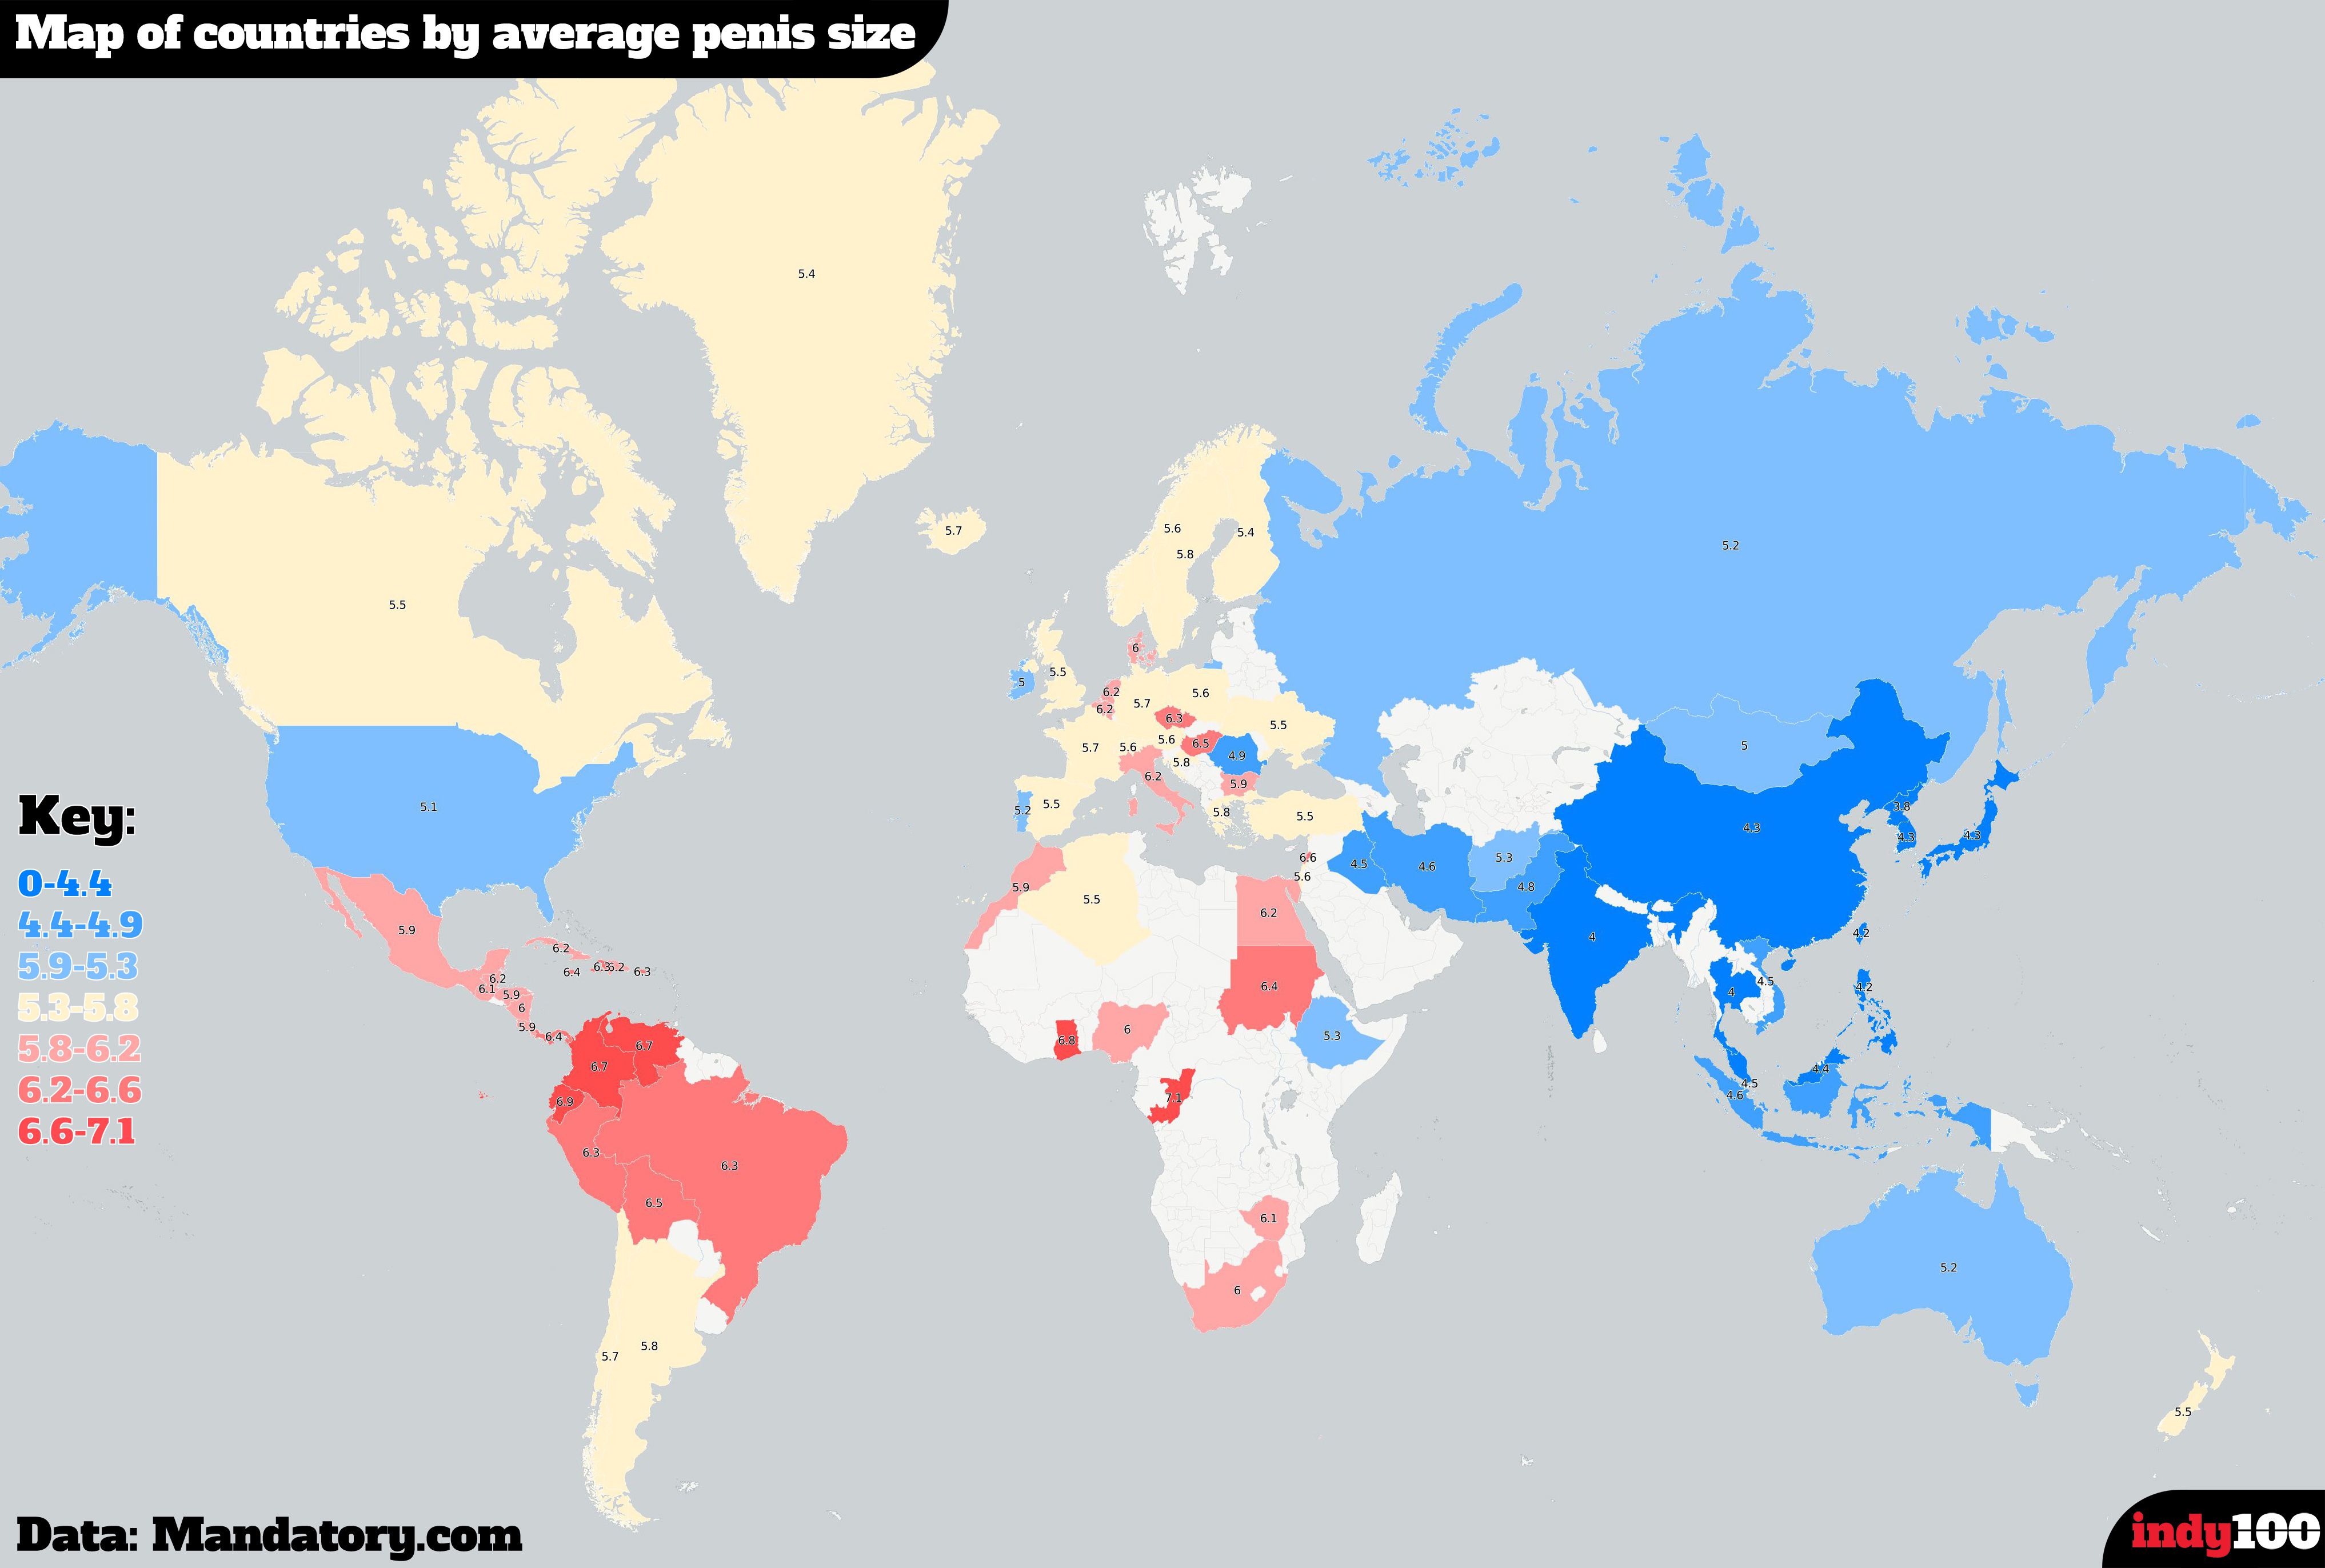 Size Comparison: Average Women Breast Size by Country 